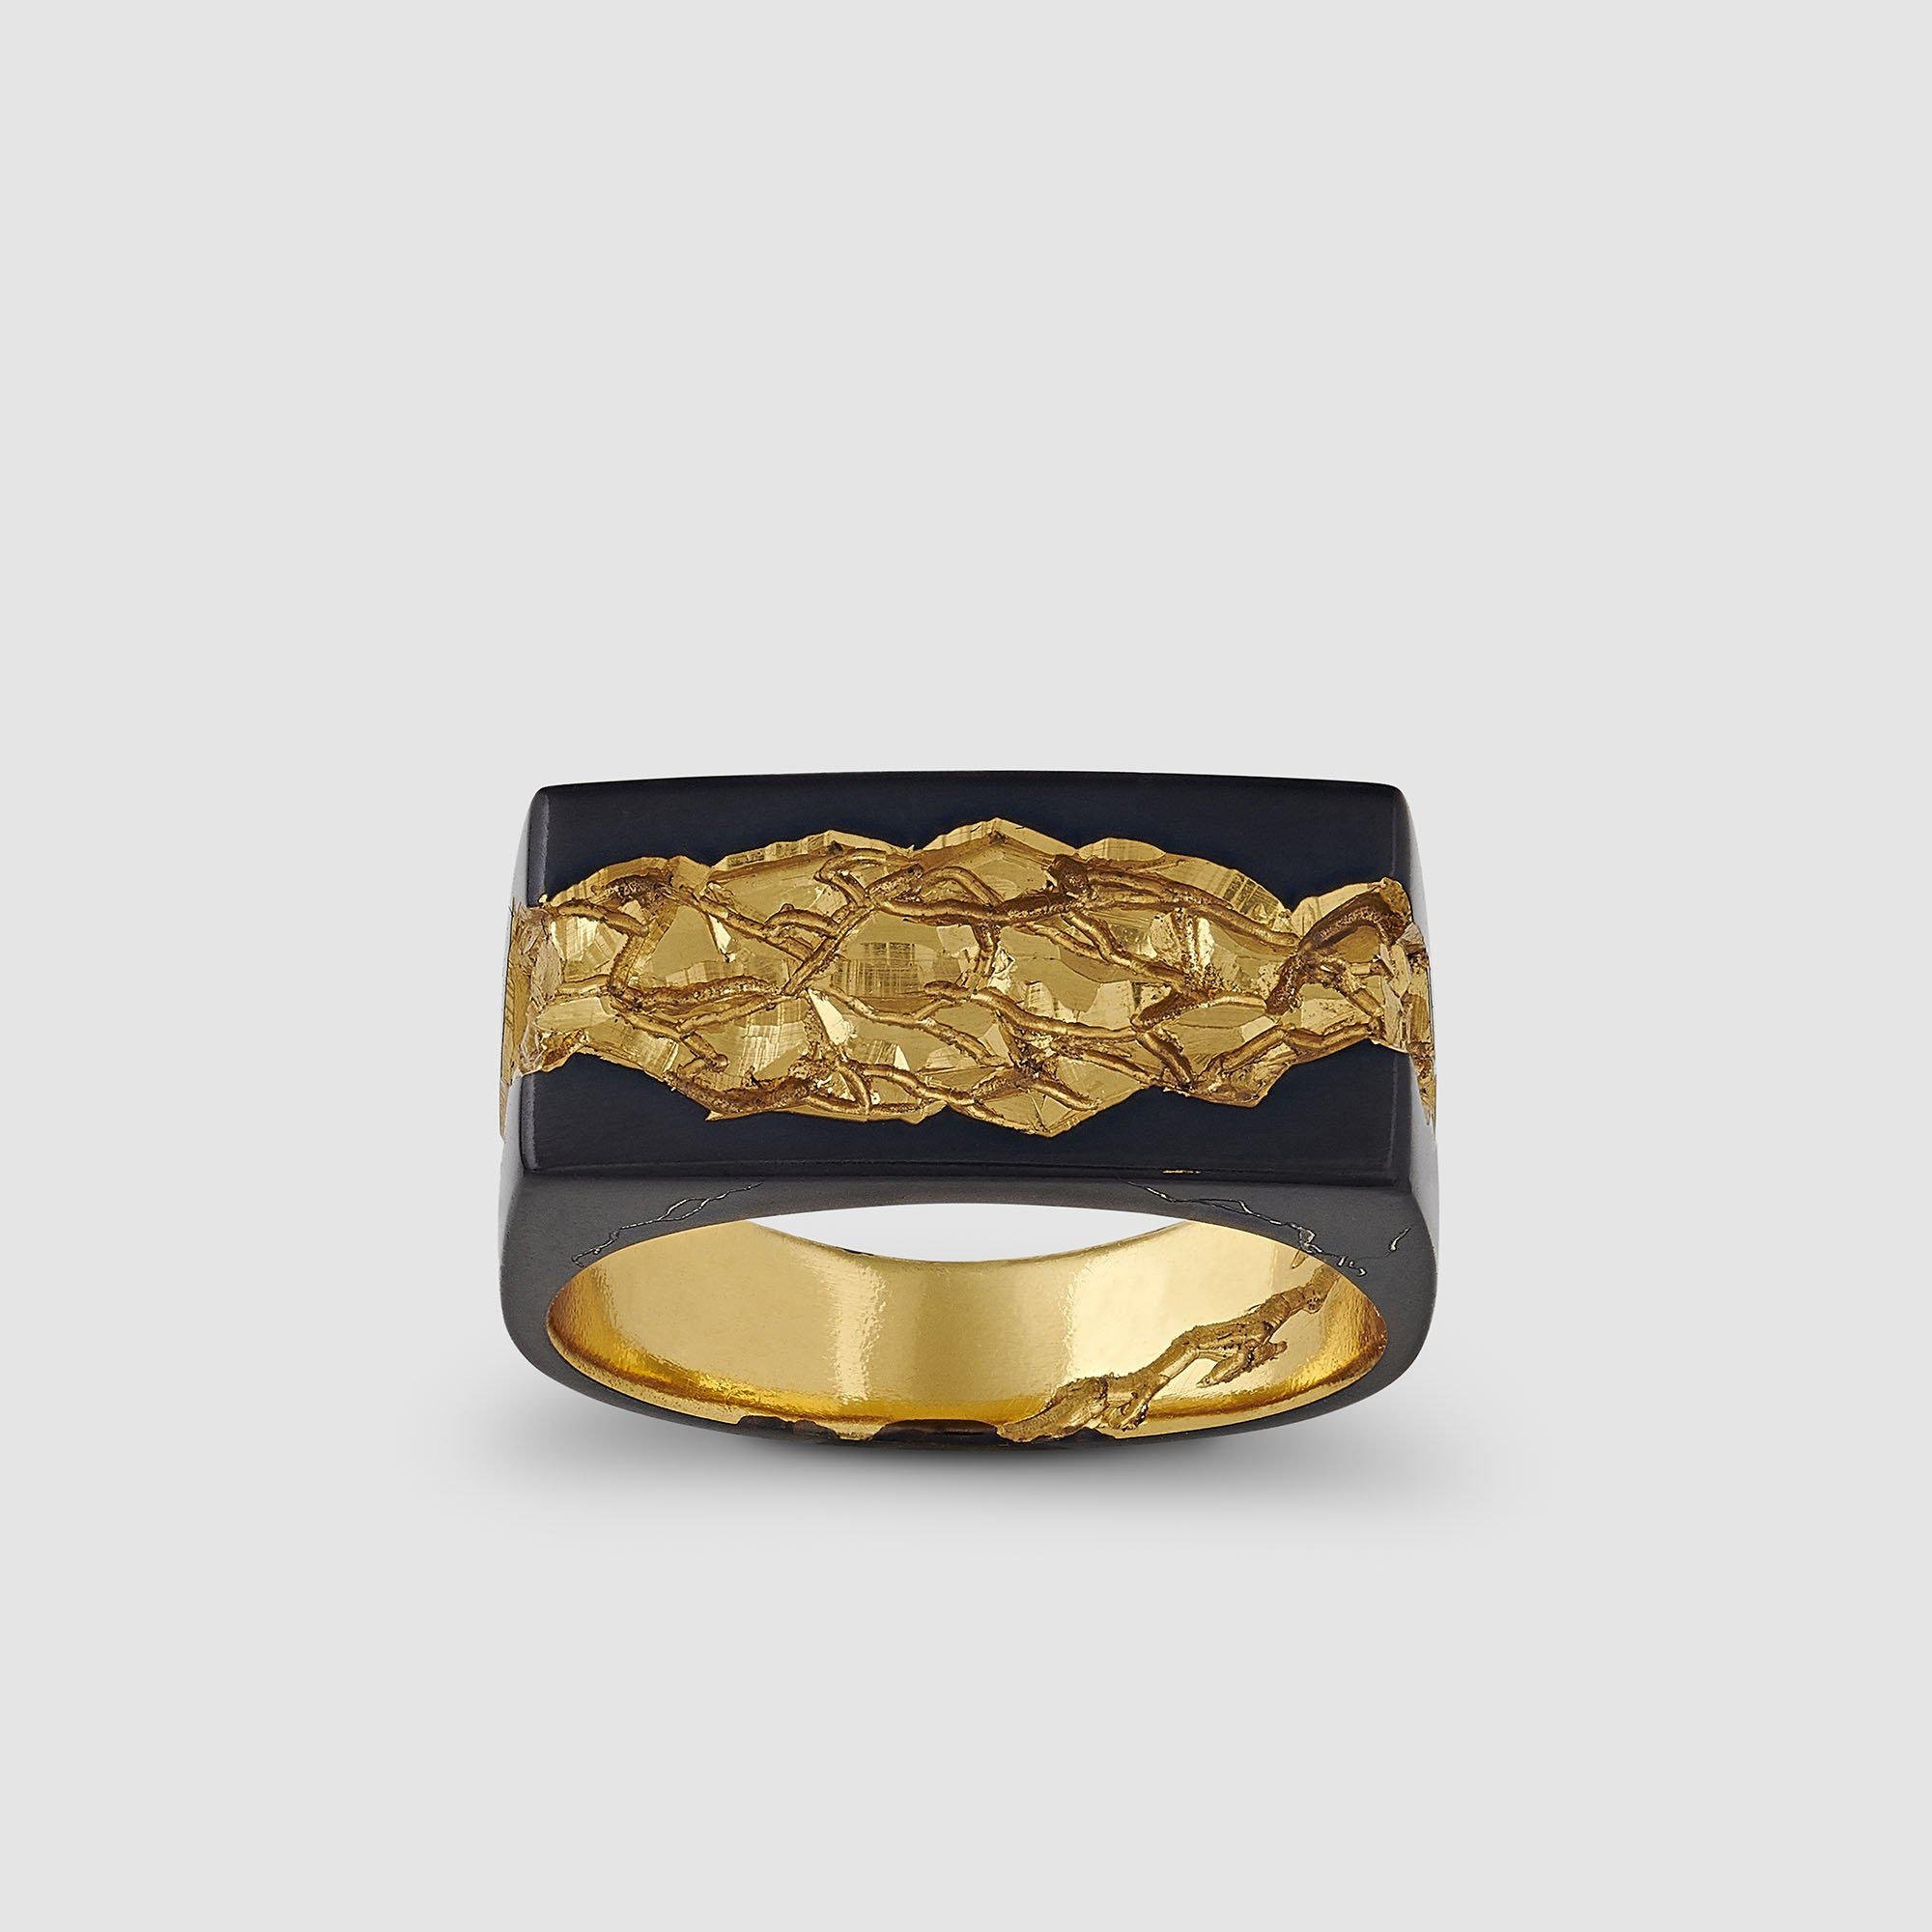 Castro - Hellsgate III Ring - (Yellow Gold) by CASTRO